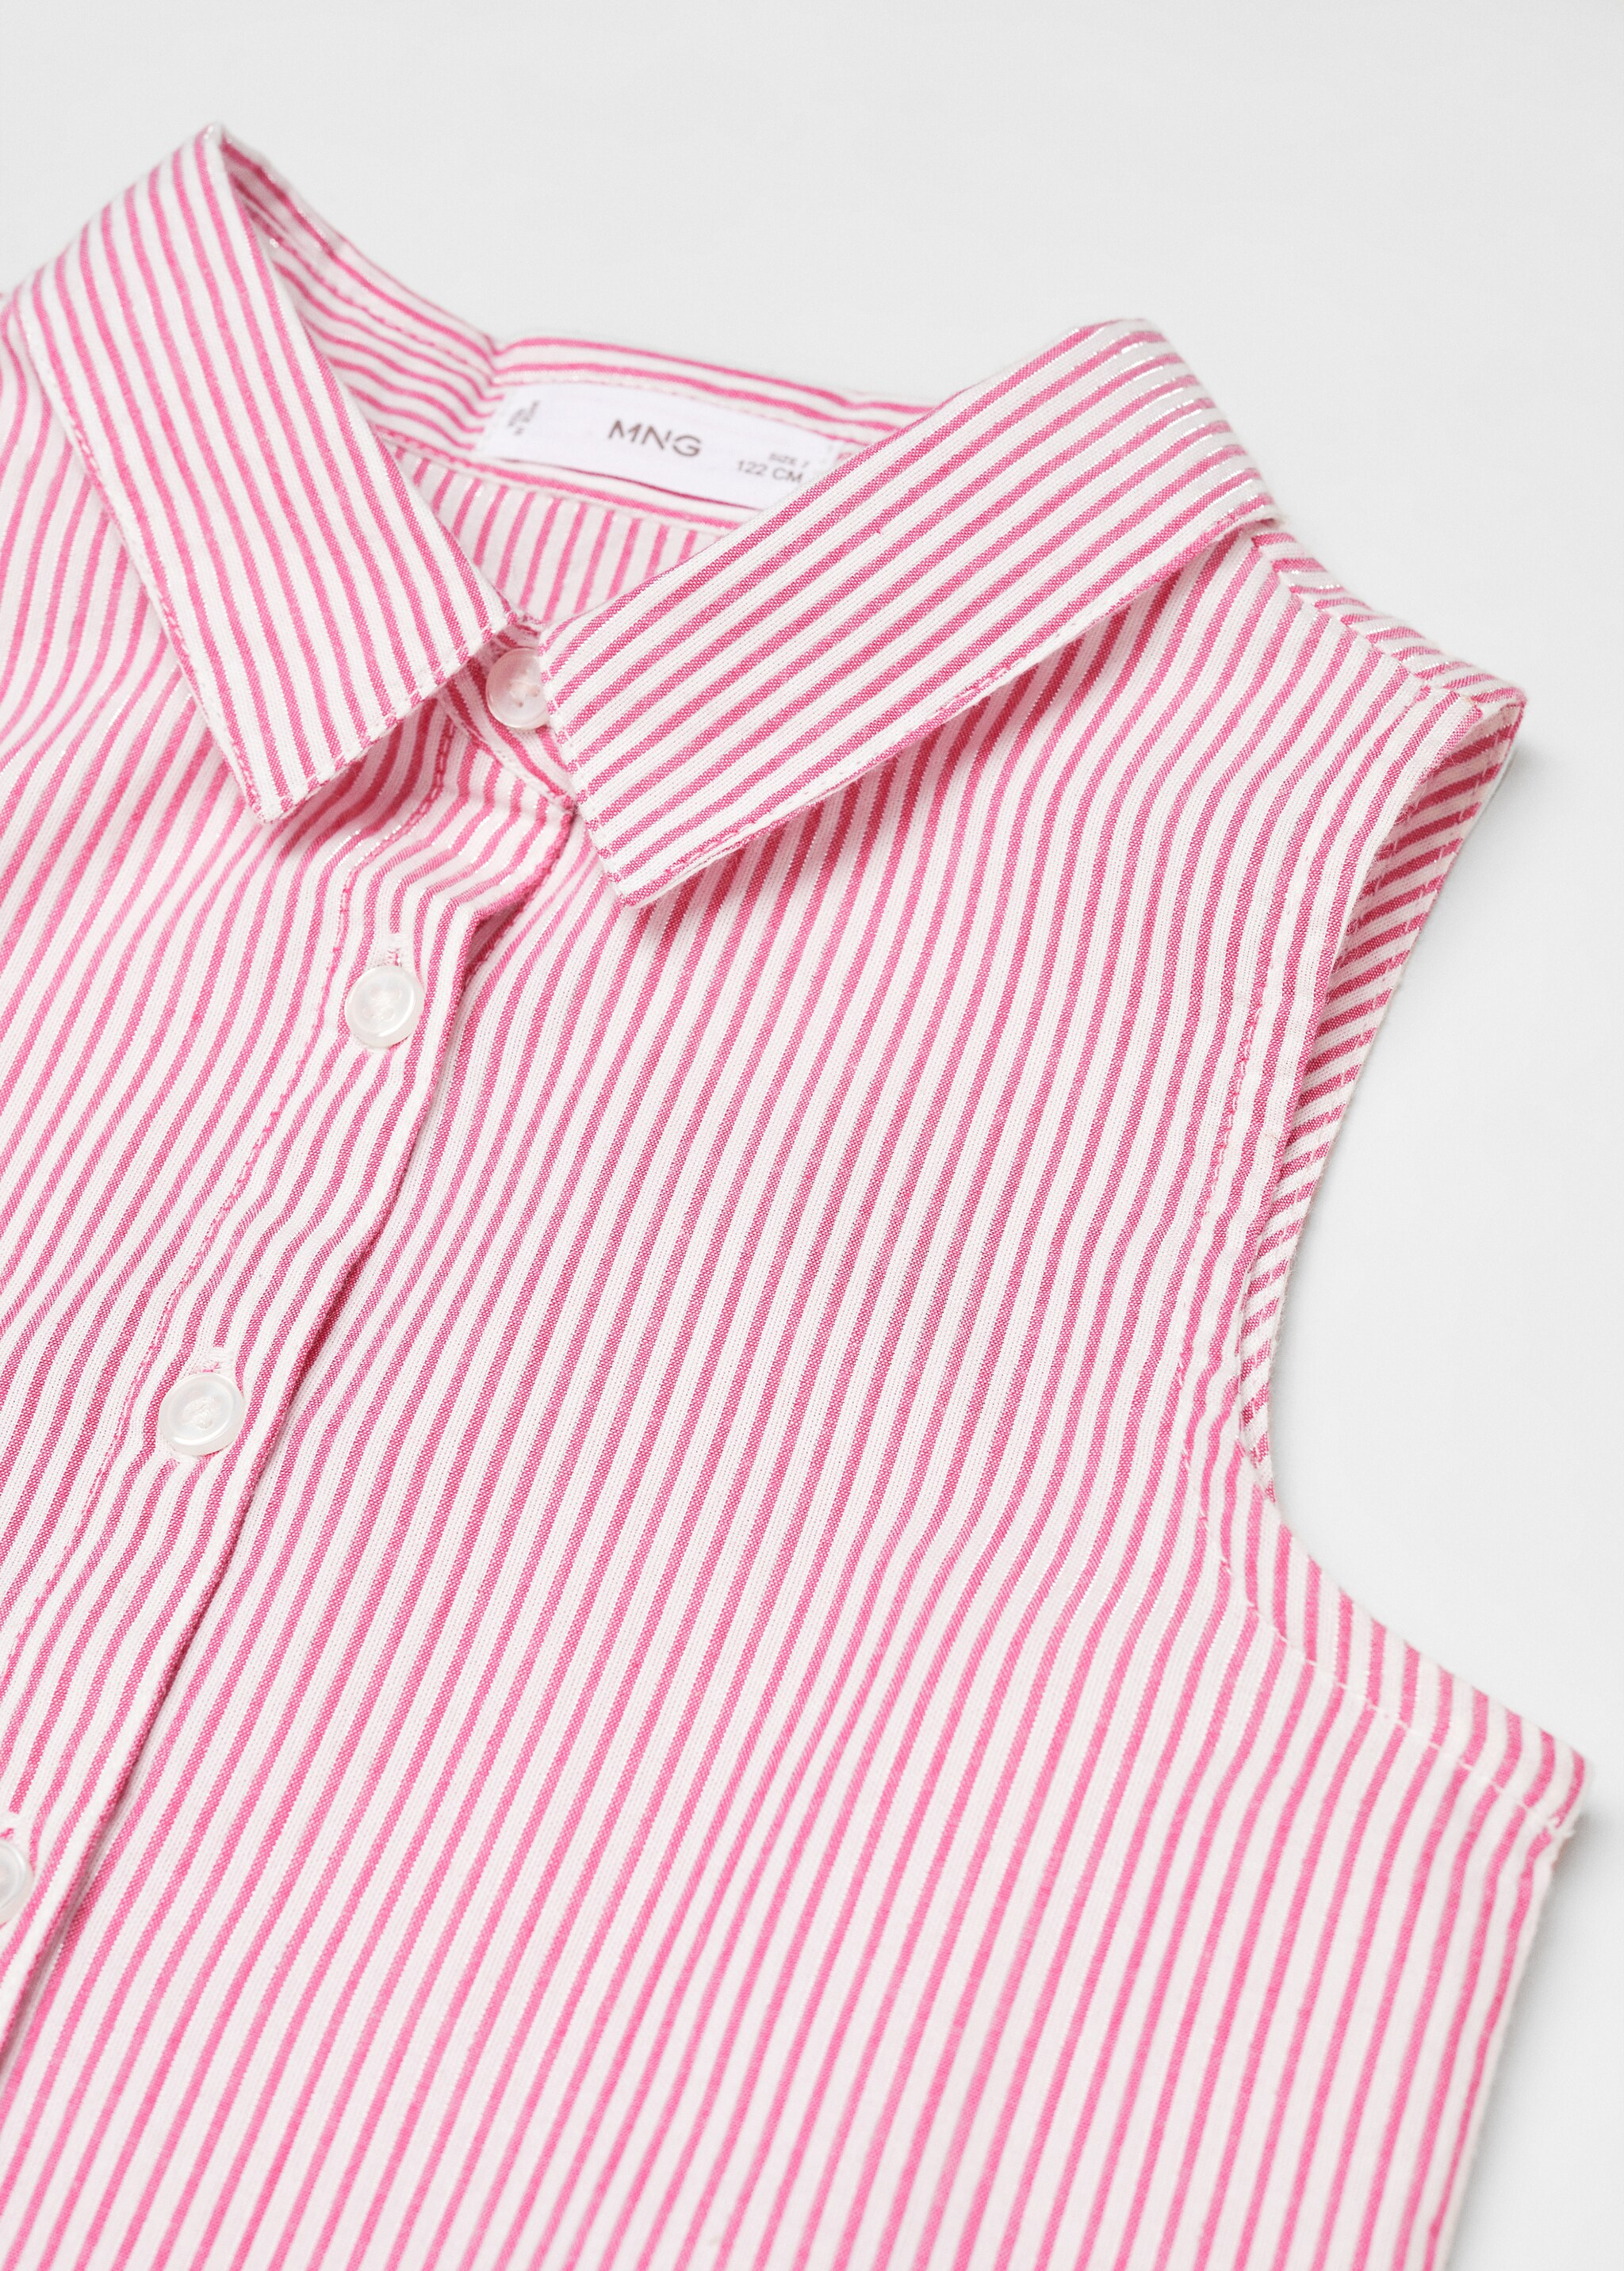 Striped shirt dress - Details of the article 8